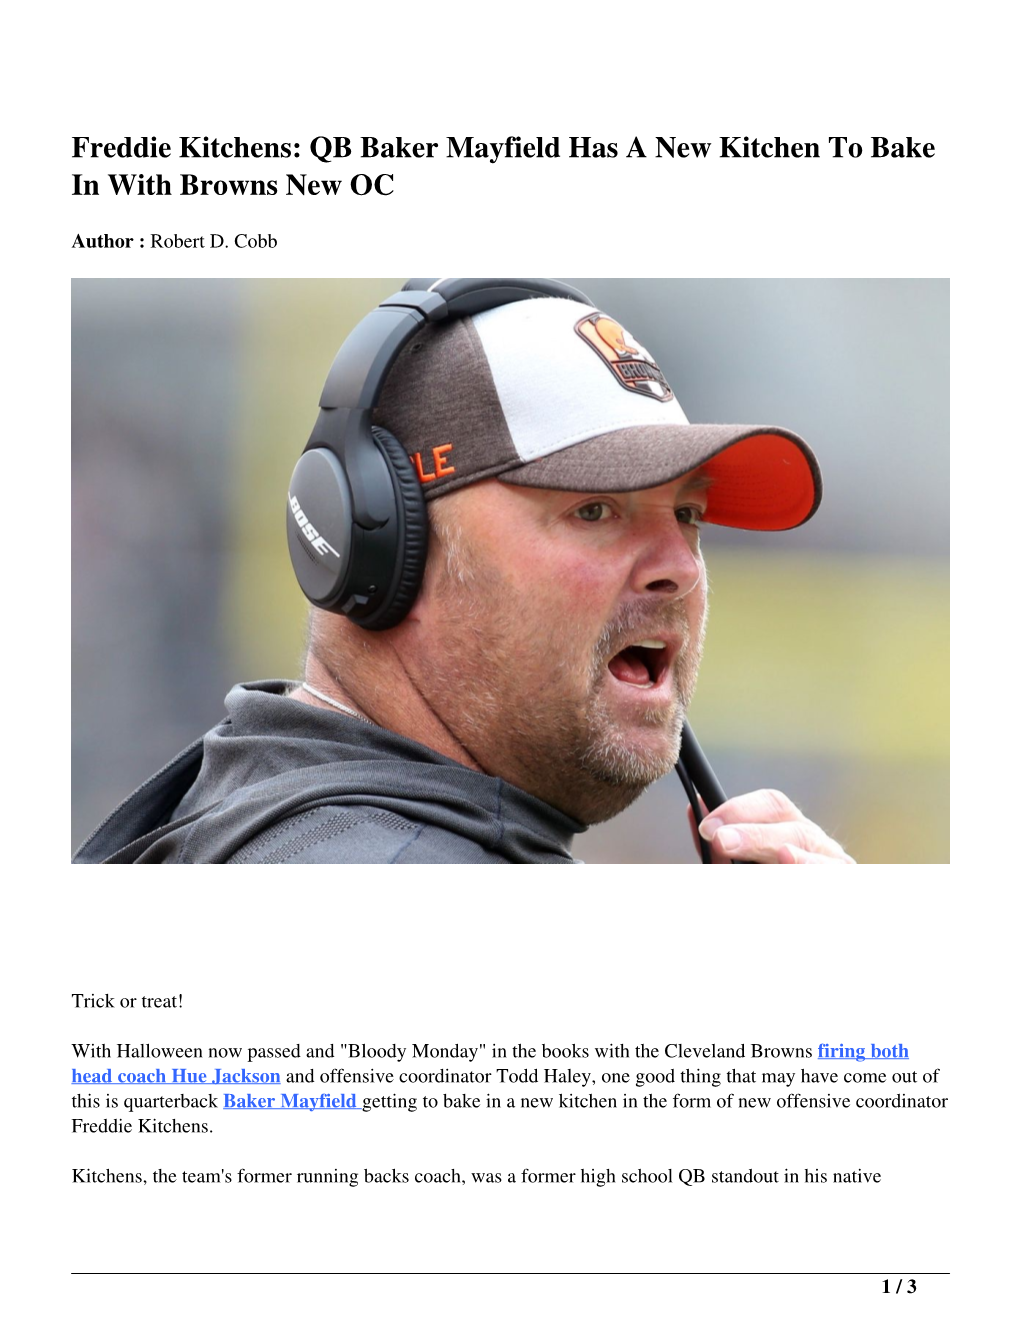 Freddie Kitchens: QB Baker Mayfield Has a New Kitchen to Bake in with Browns New OC